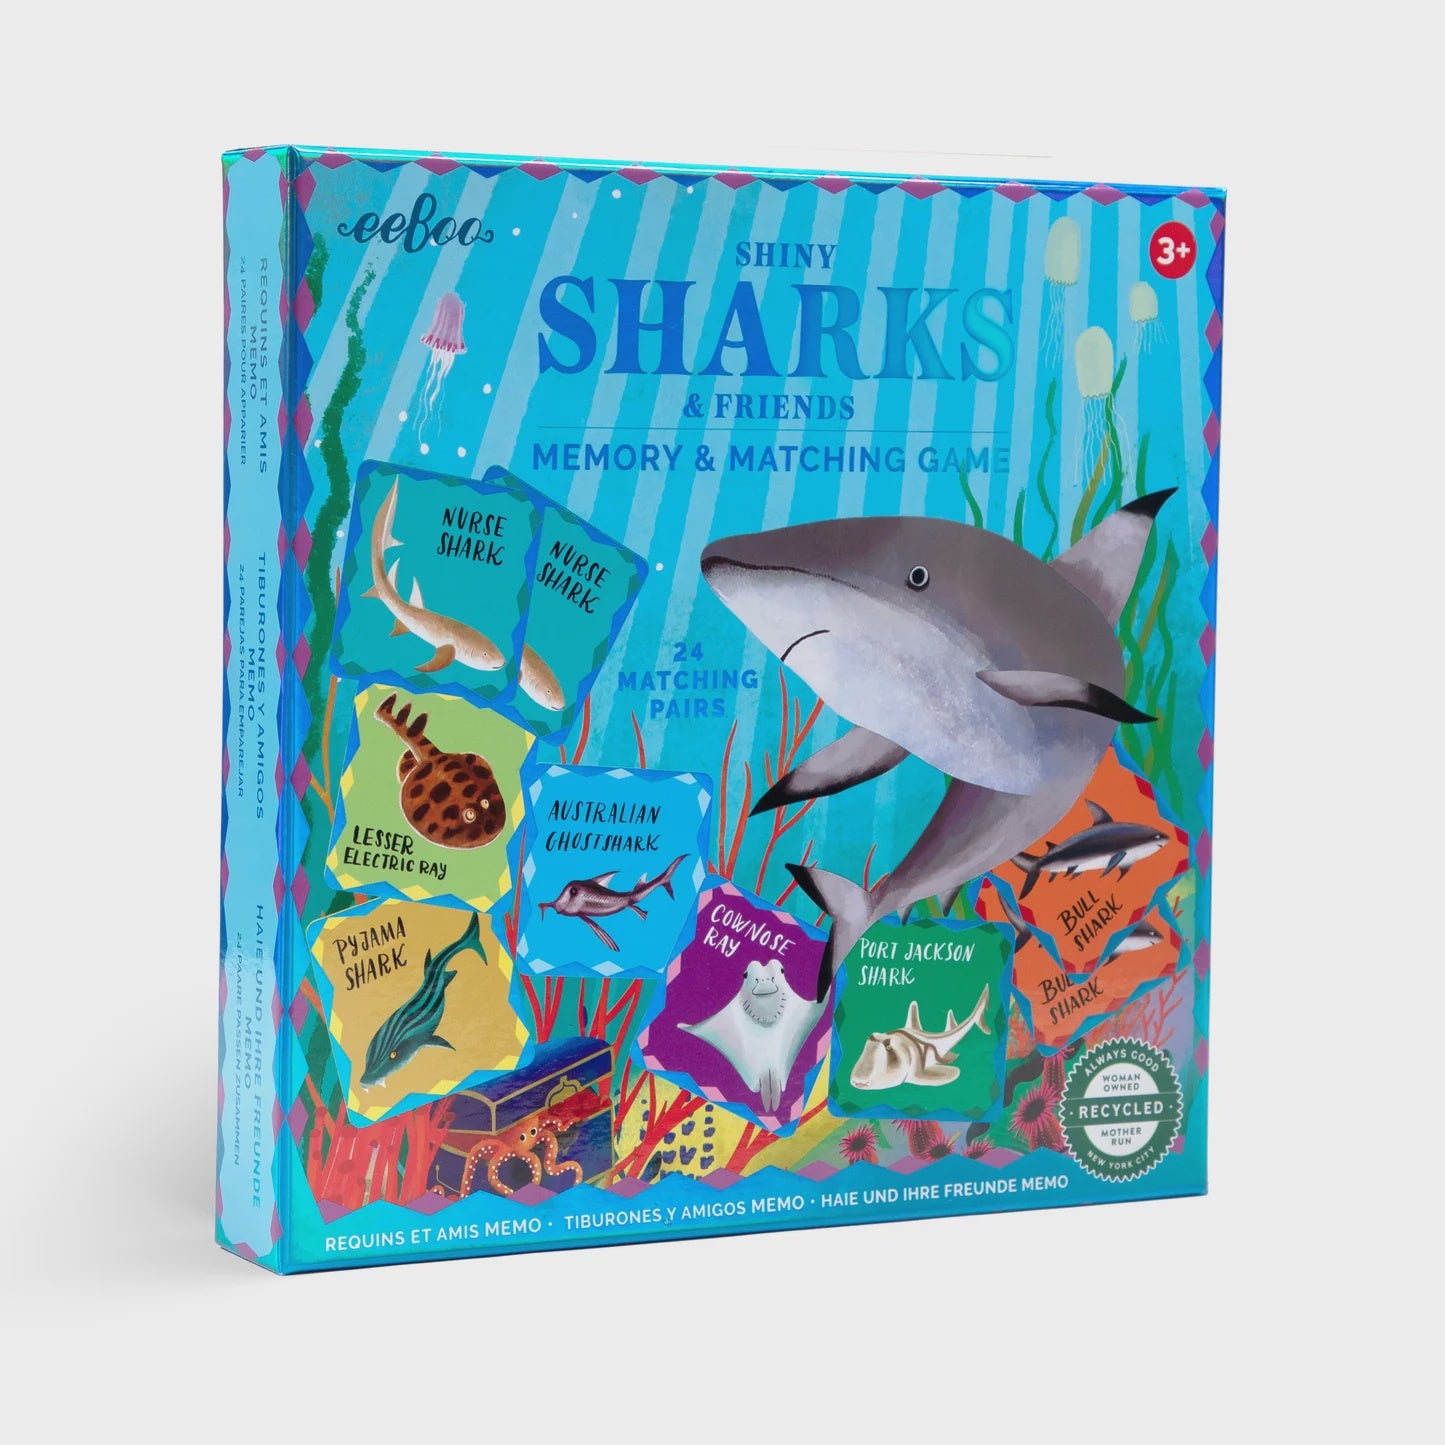 Memory & Matching Game - Shiny Sharks & Friends